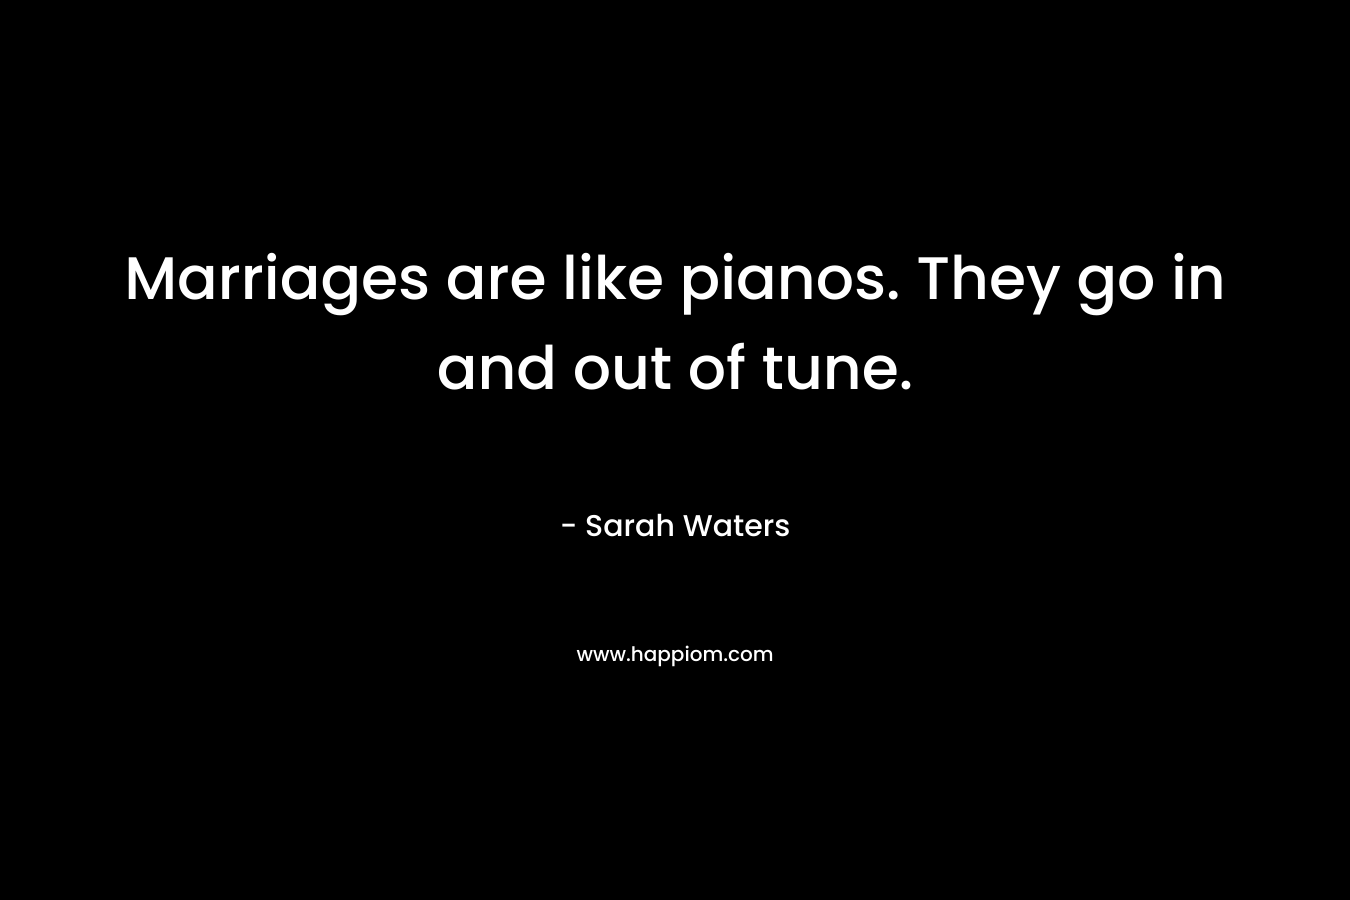 Marriages are like pianos. They go in and out of tune. – Sarah Waters